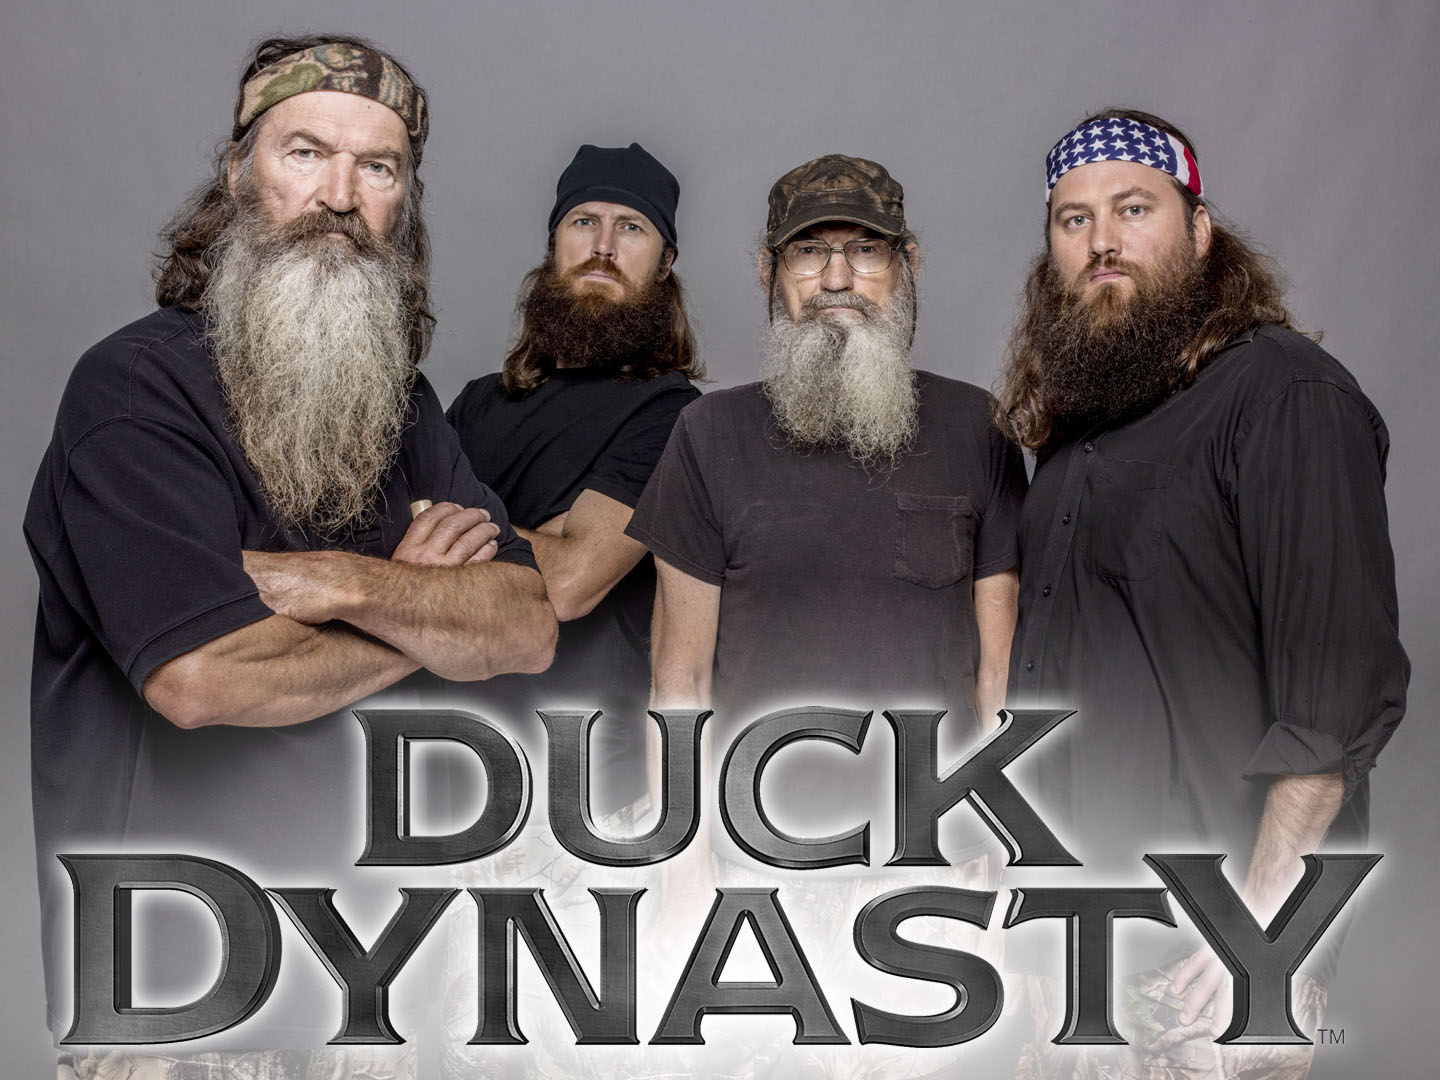 'Duck Dynasty' Sets Cable Record | MrConservative.com | Mr. Conservative is the top website for news, political cartoons, breaking news, republican election ...